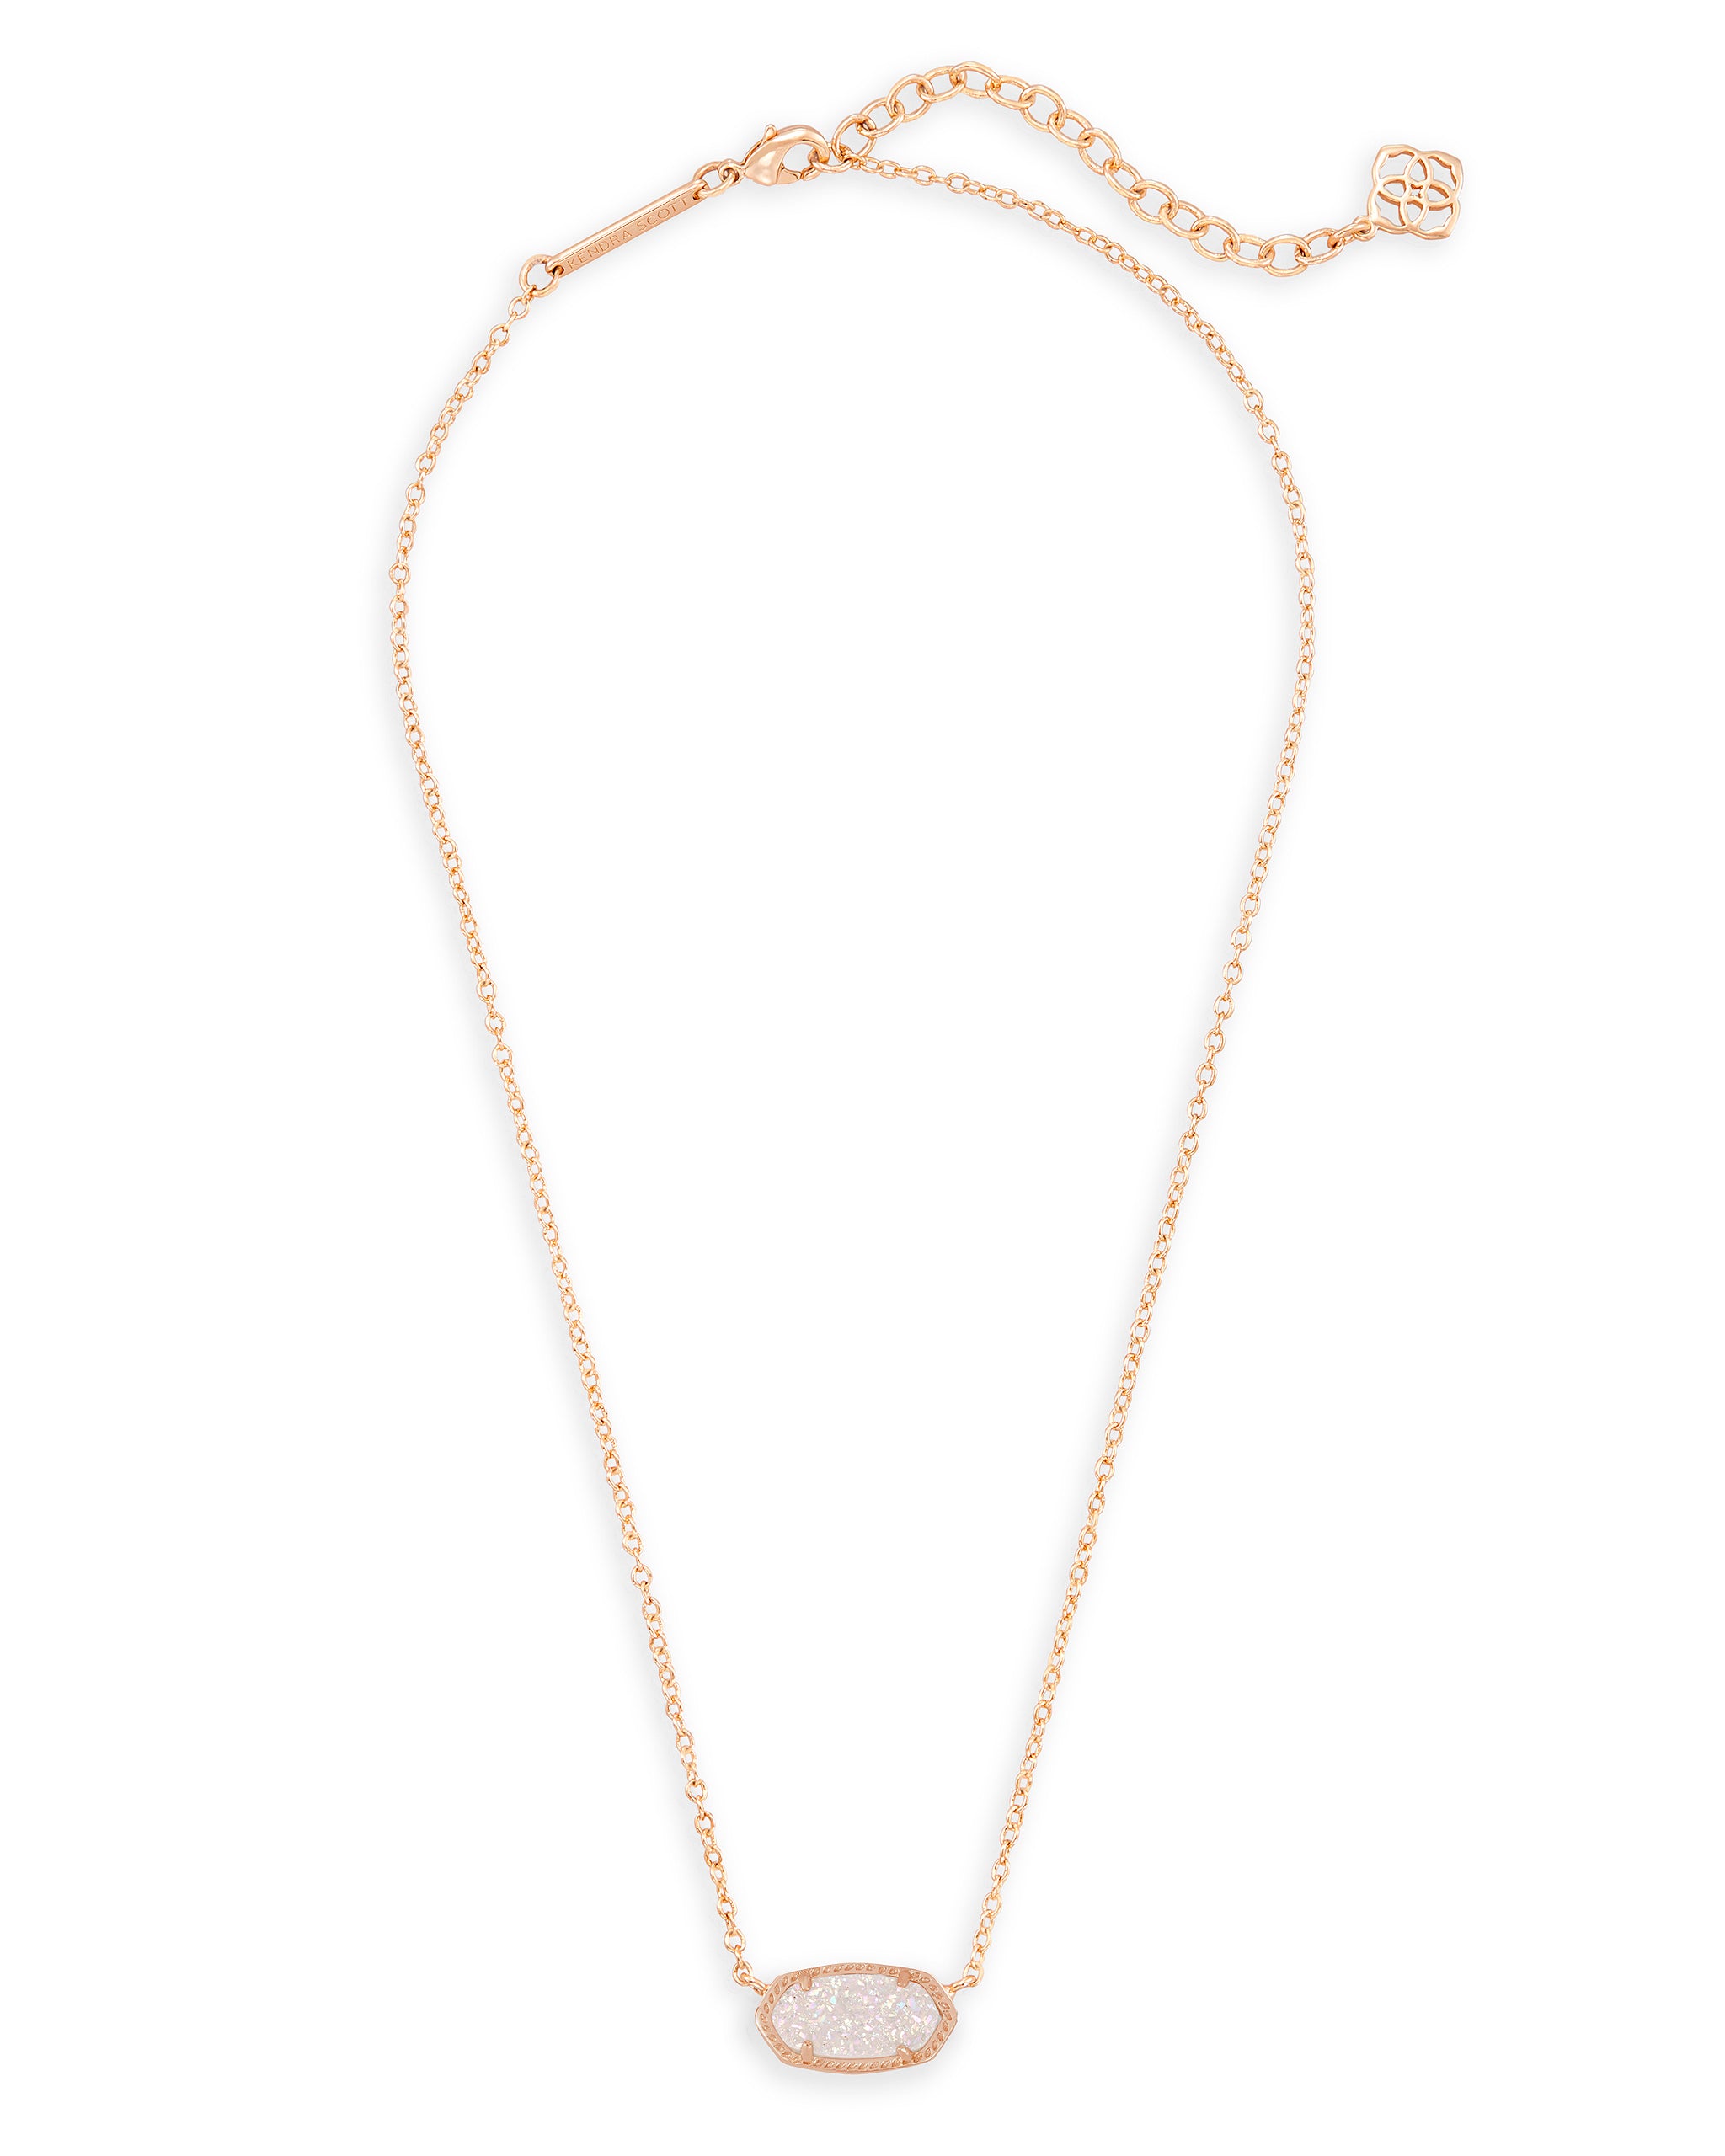 Kendra Scott Elisa Oval Pendant Necklace in Iridescent Drusy and Rose Gold